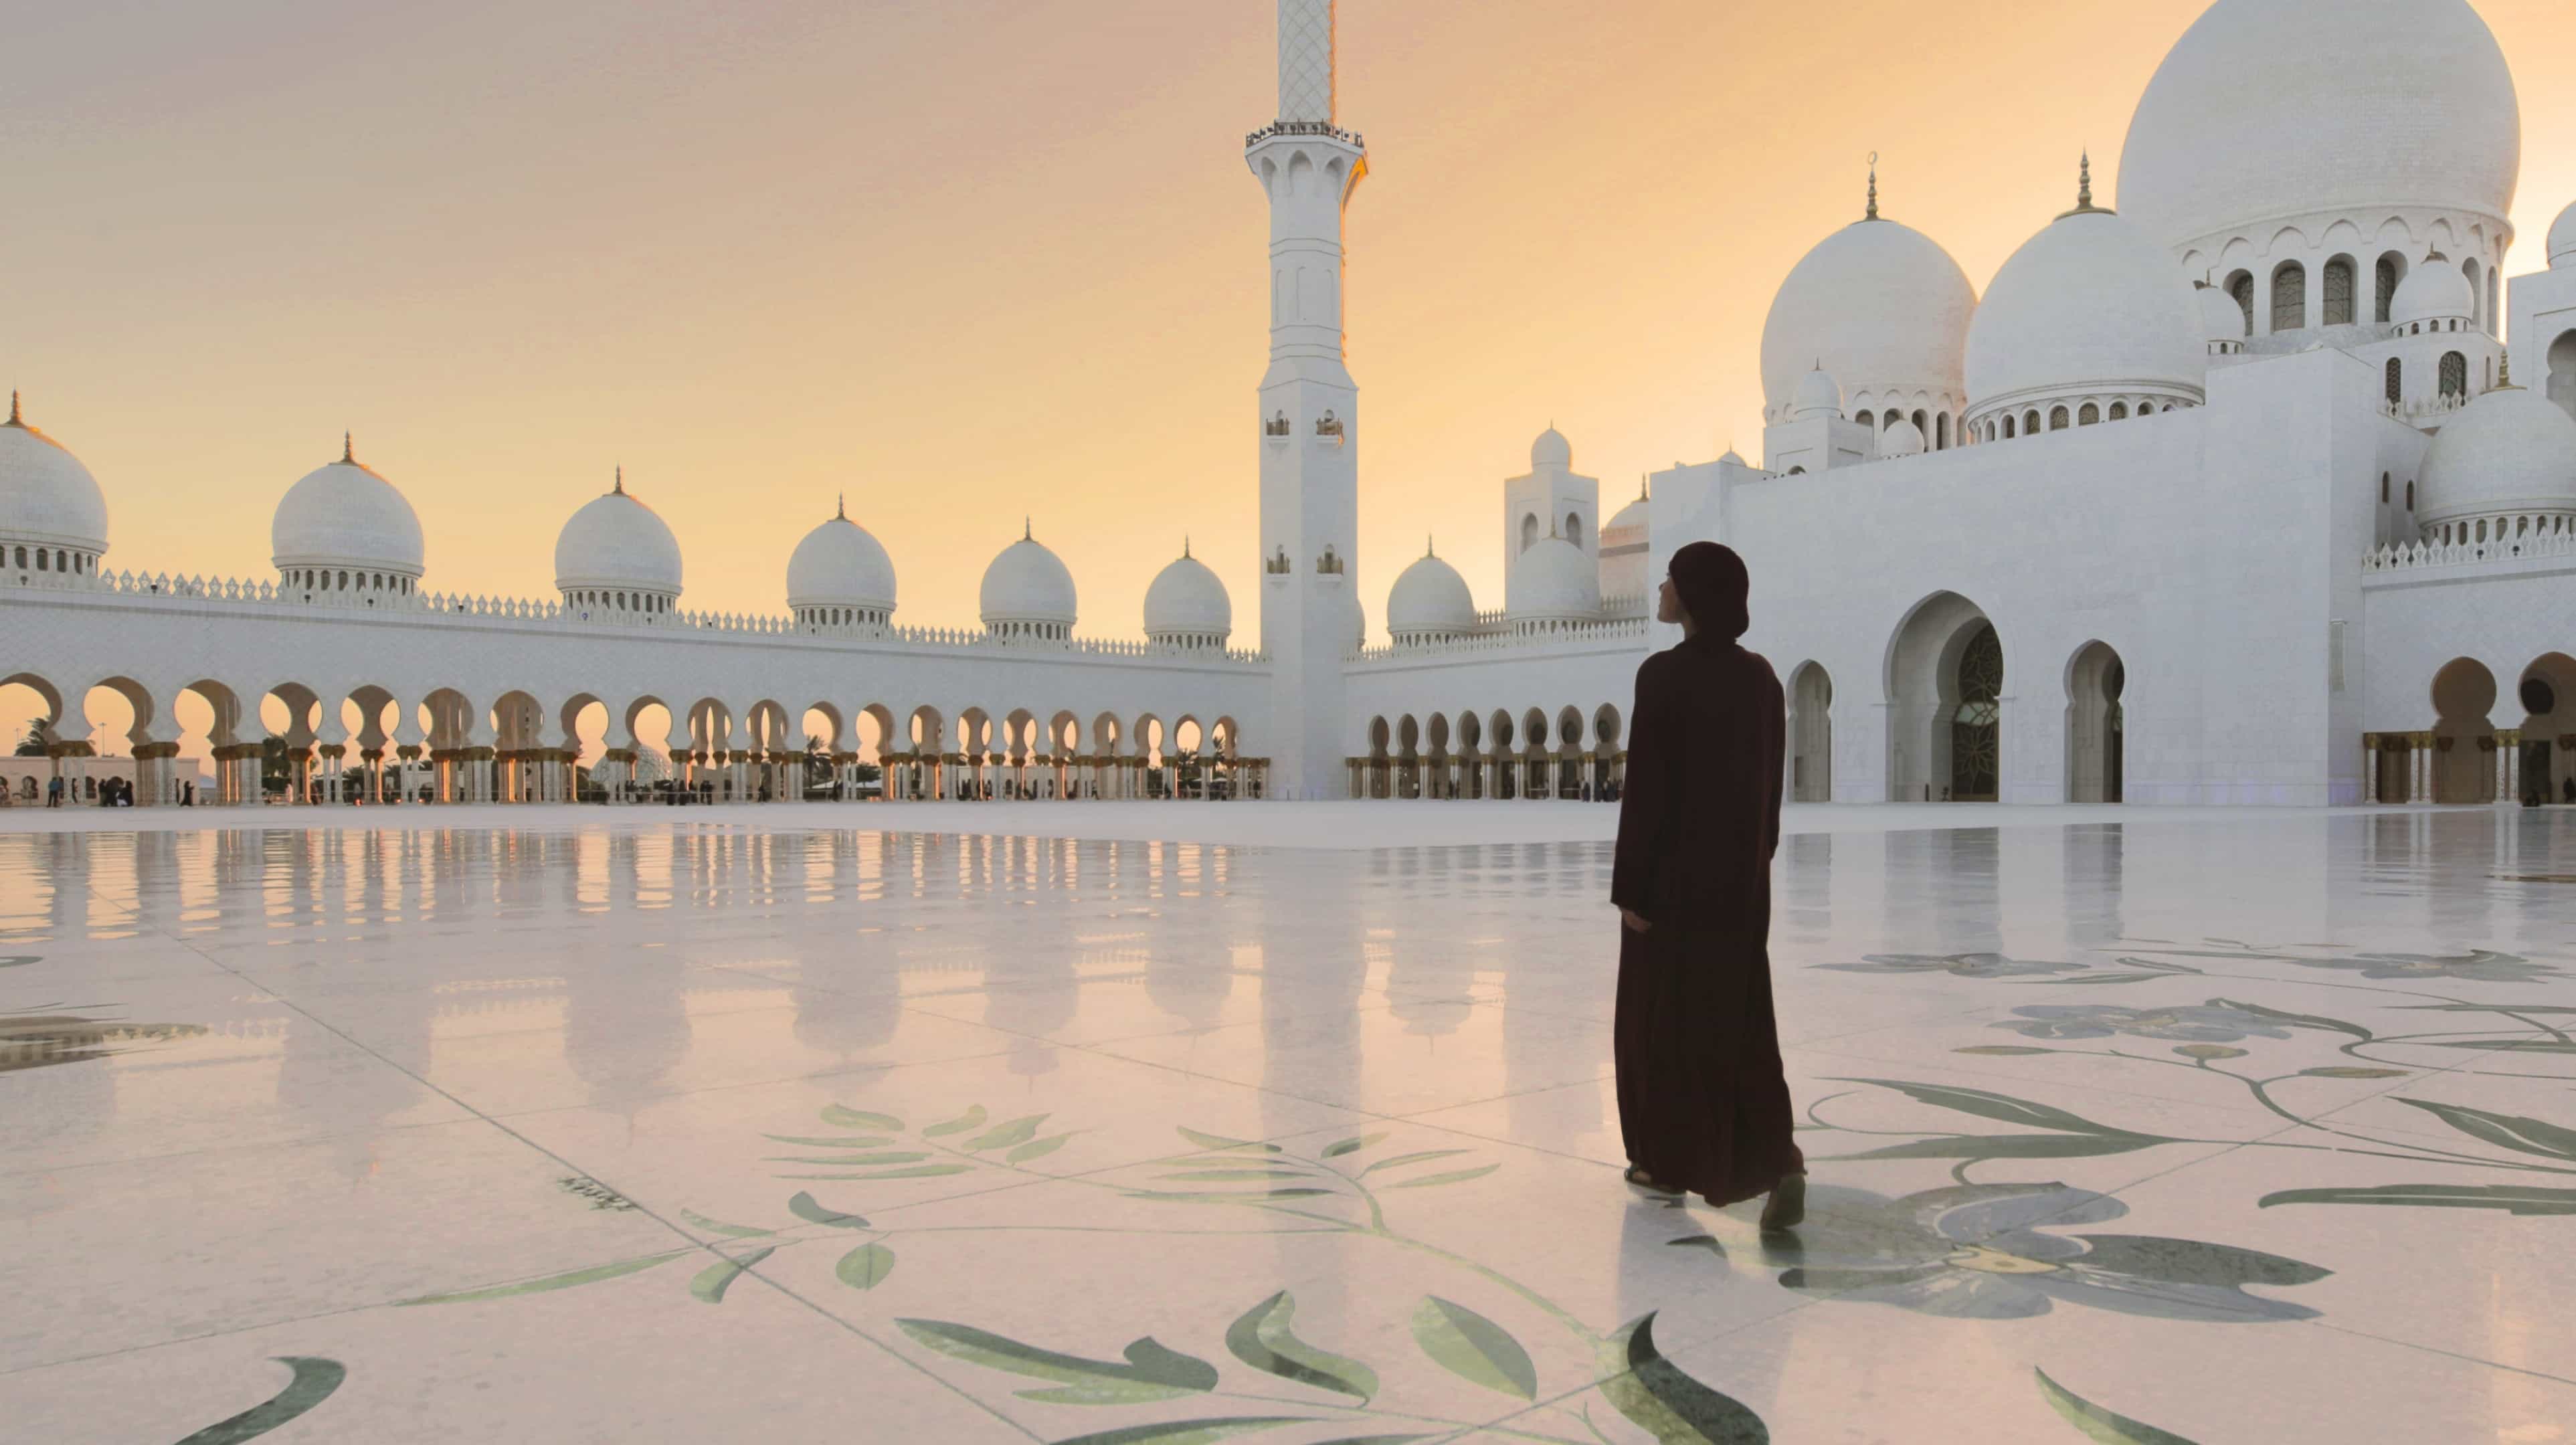 Woman in a black abaya walking in the inner courtyard of the Sheikh Zayed Grand Mosque